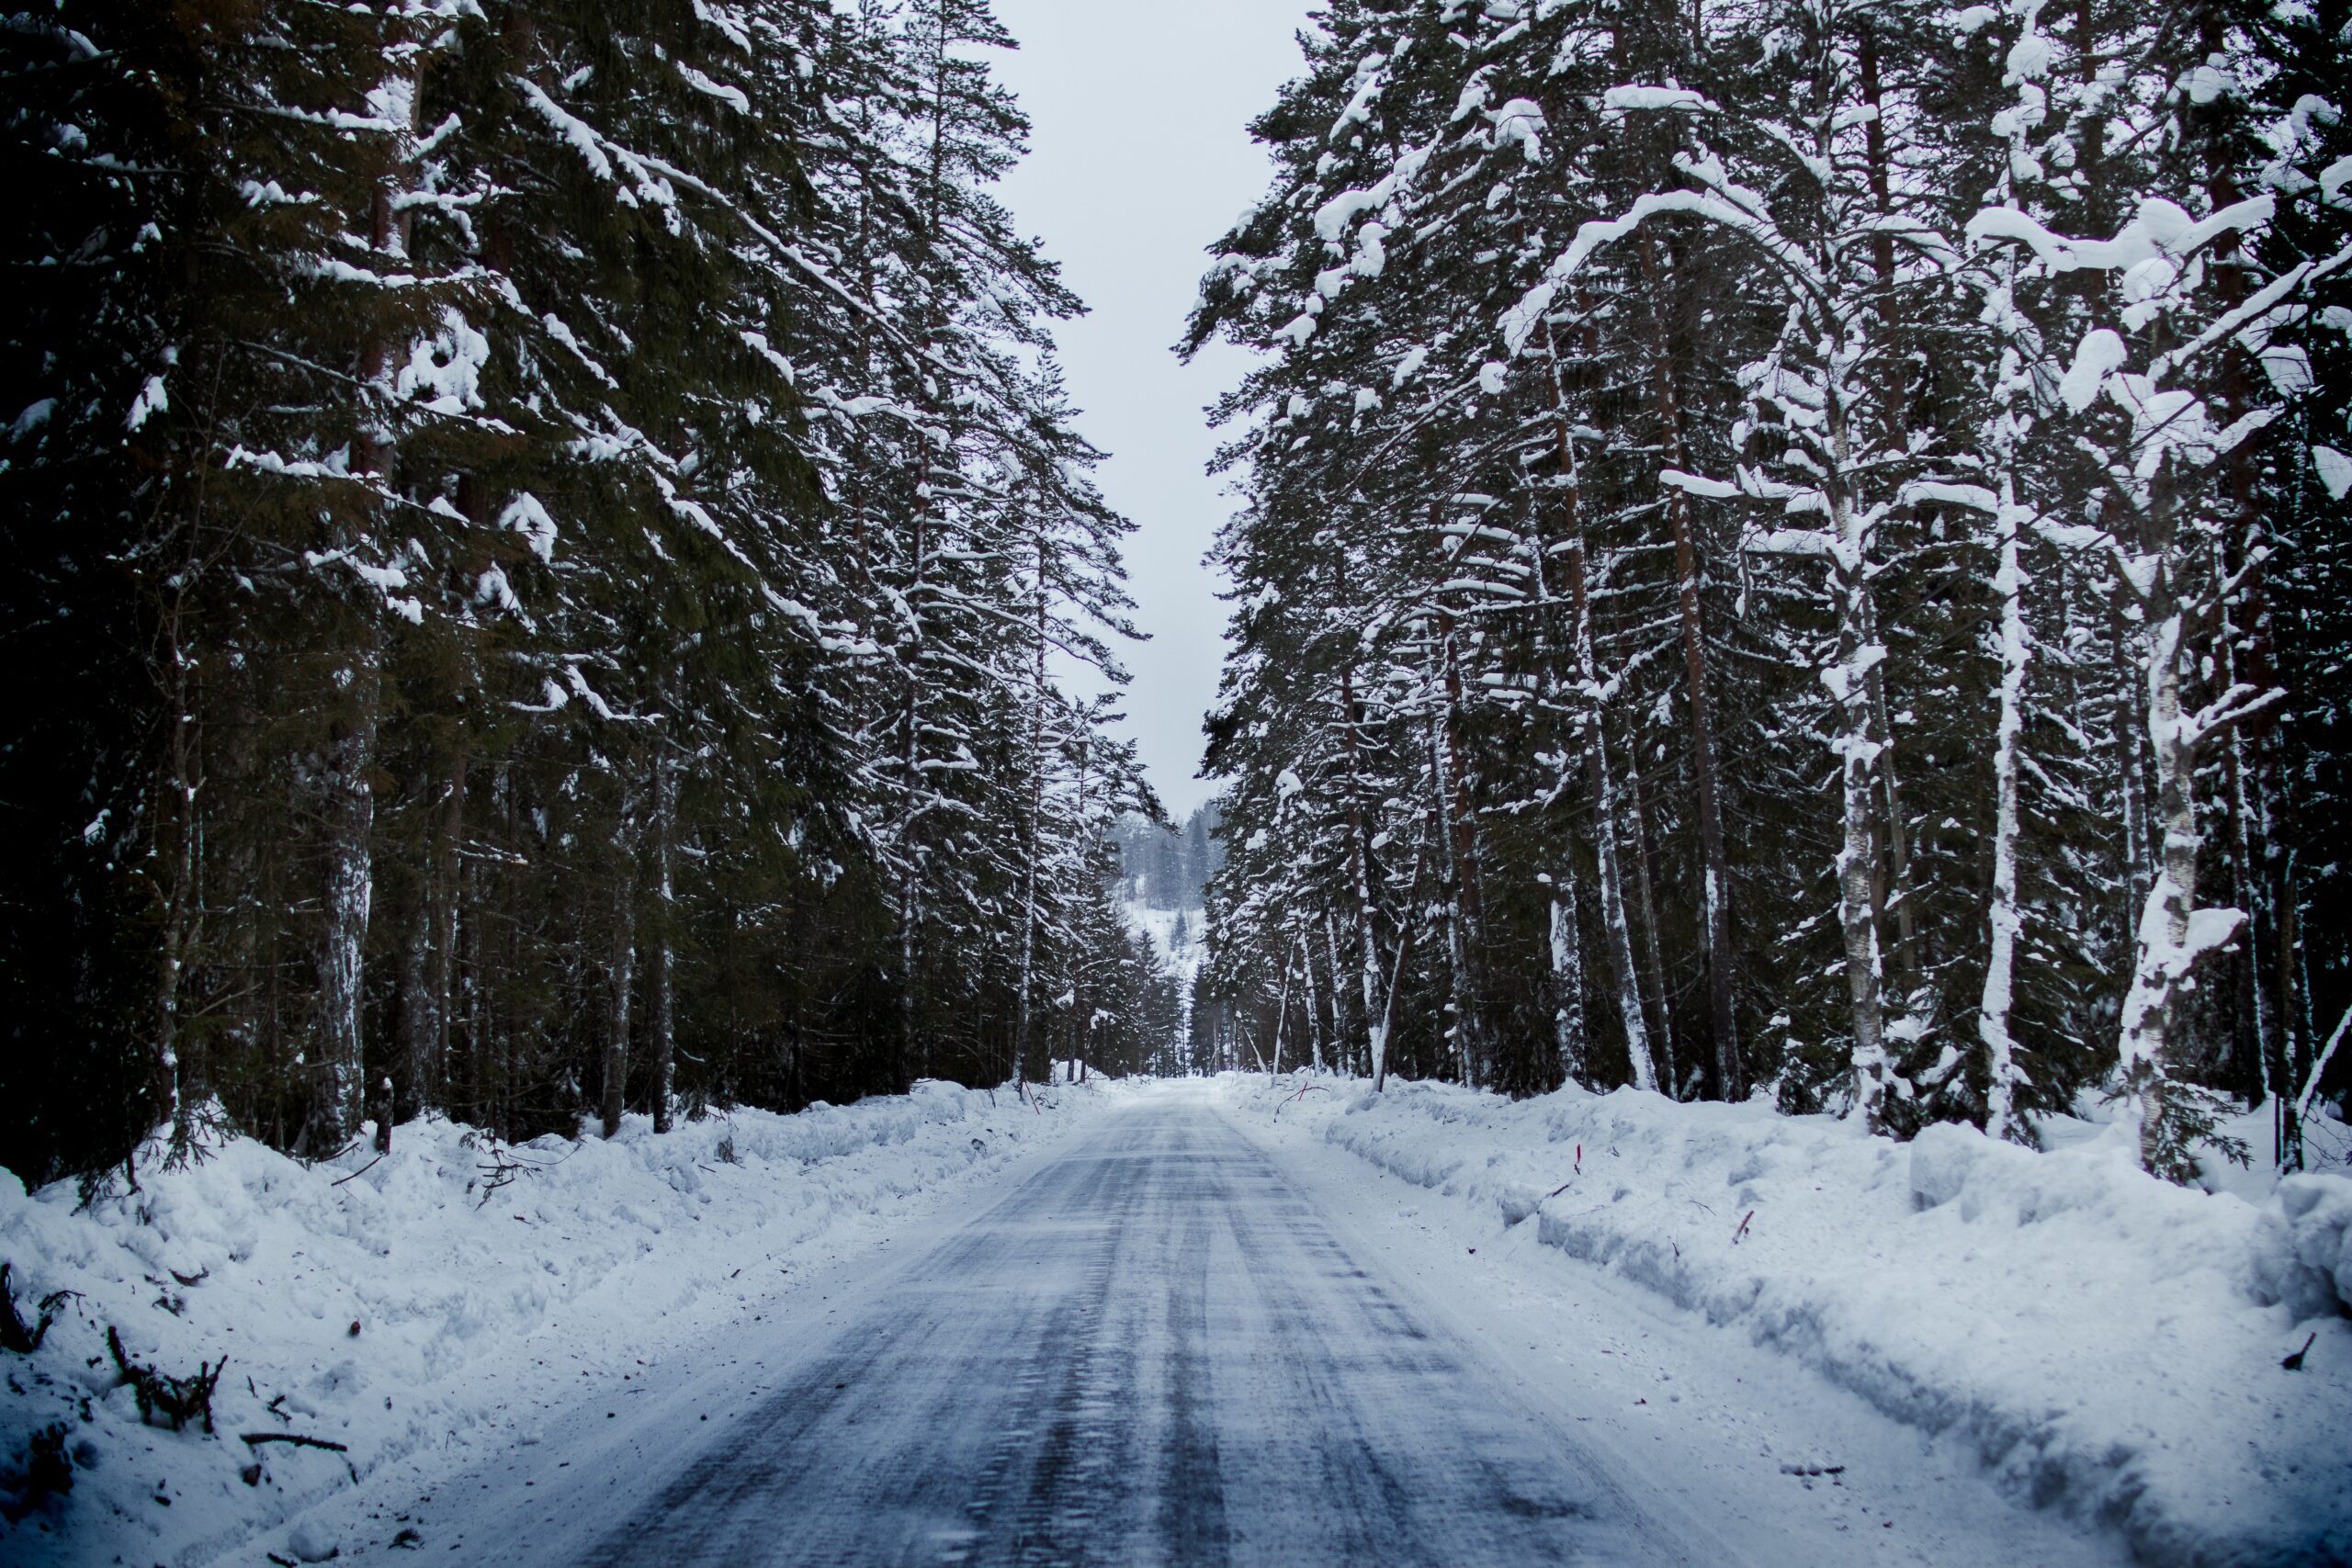 snowy roadway lined with trees